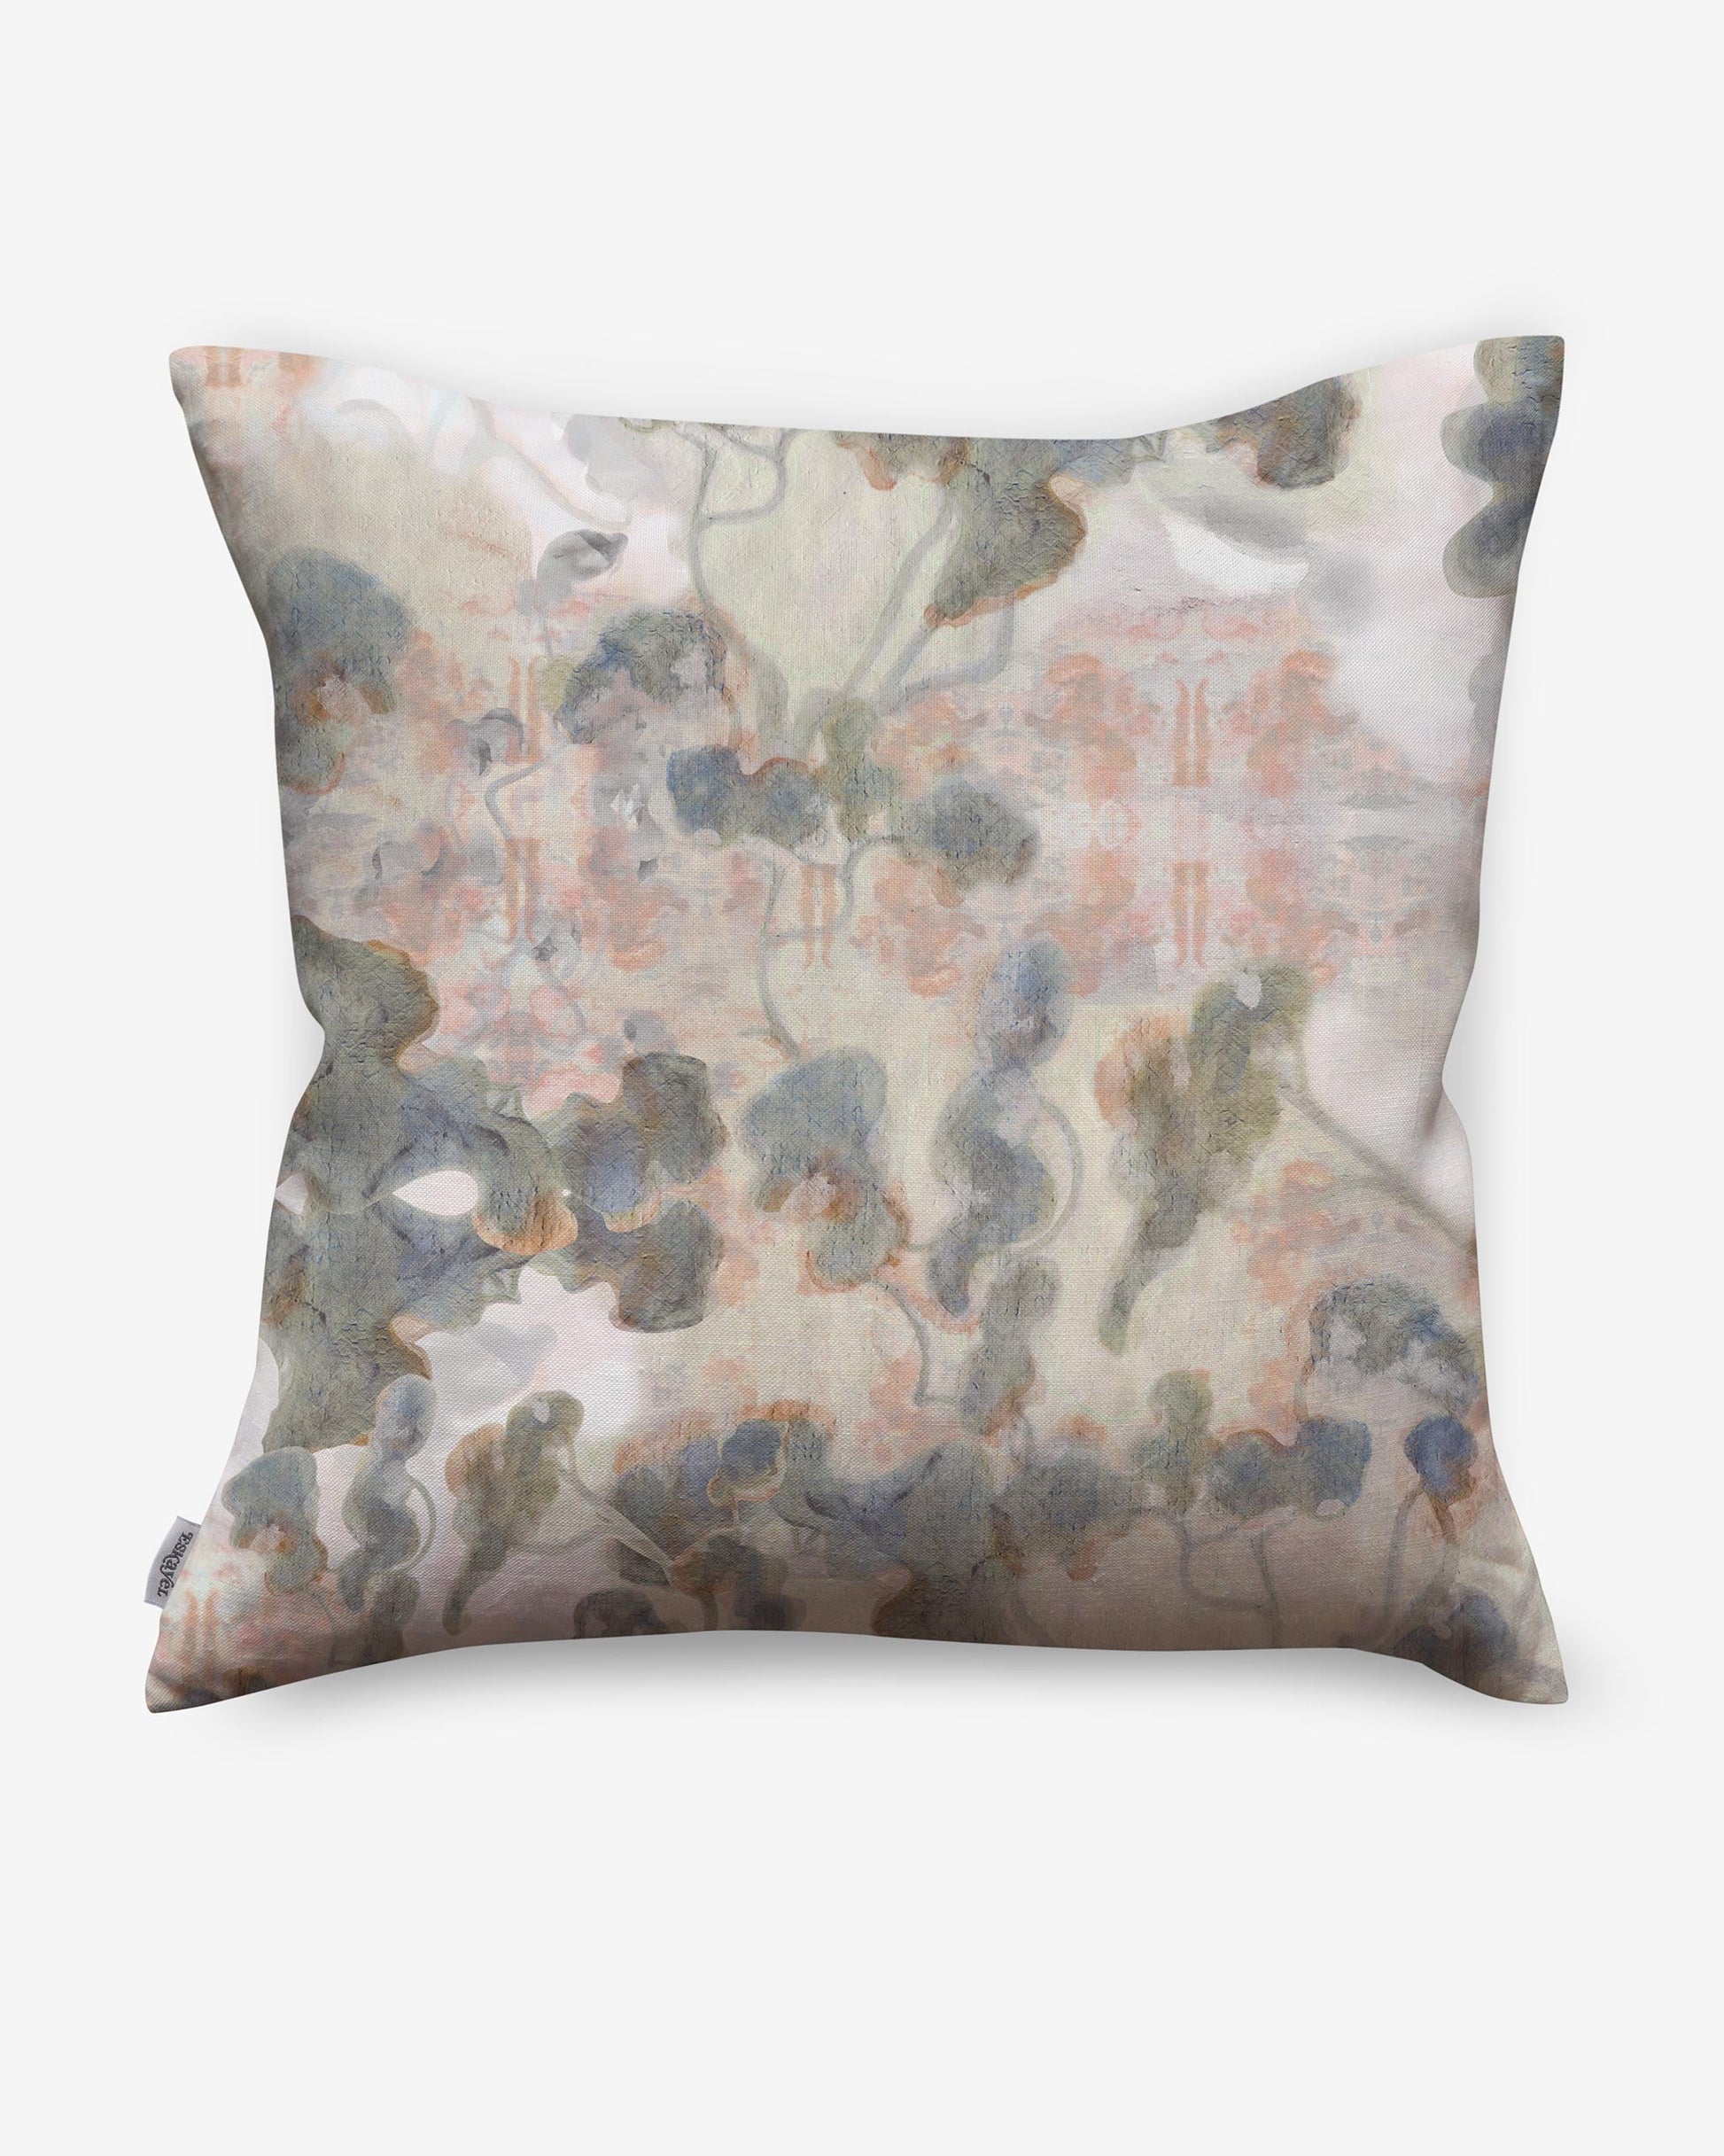 A luxury Clemente Pillow from the Presidio Collection with an abstract painting on it.